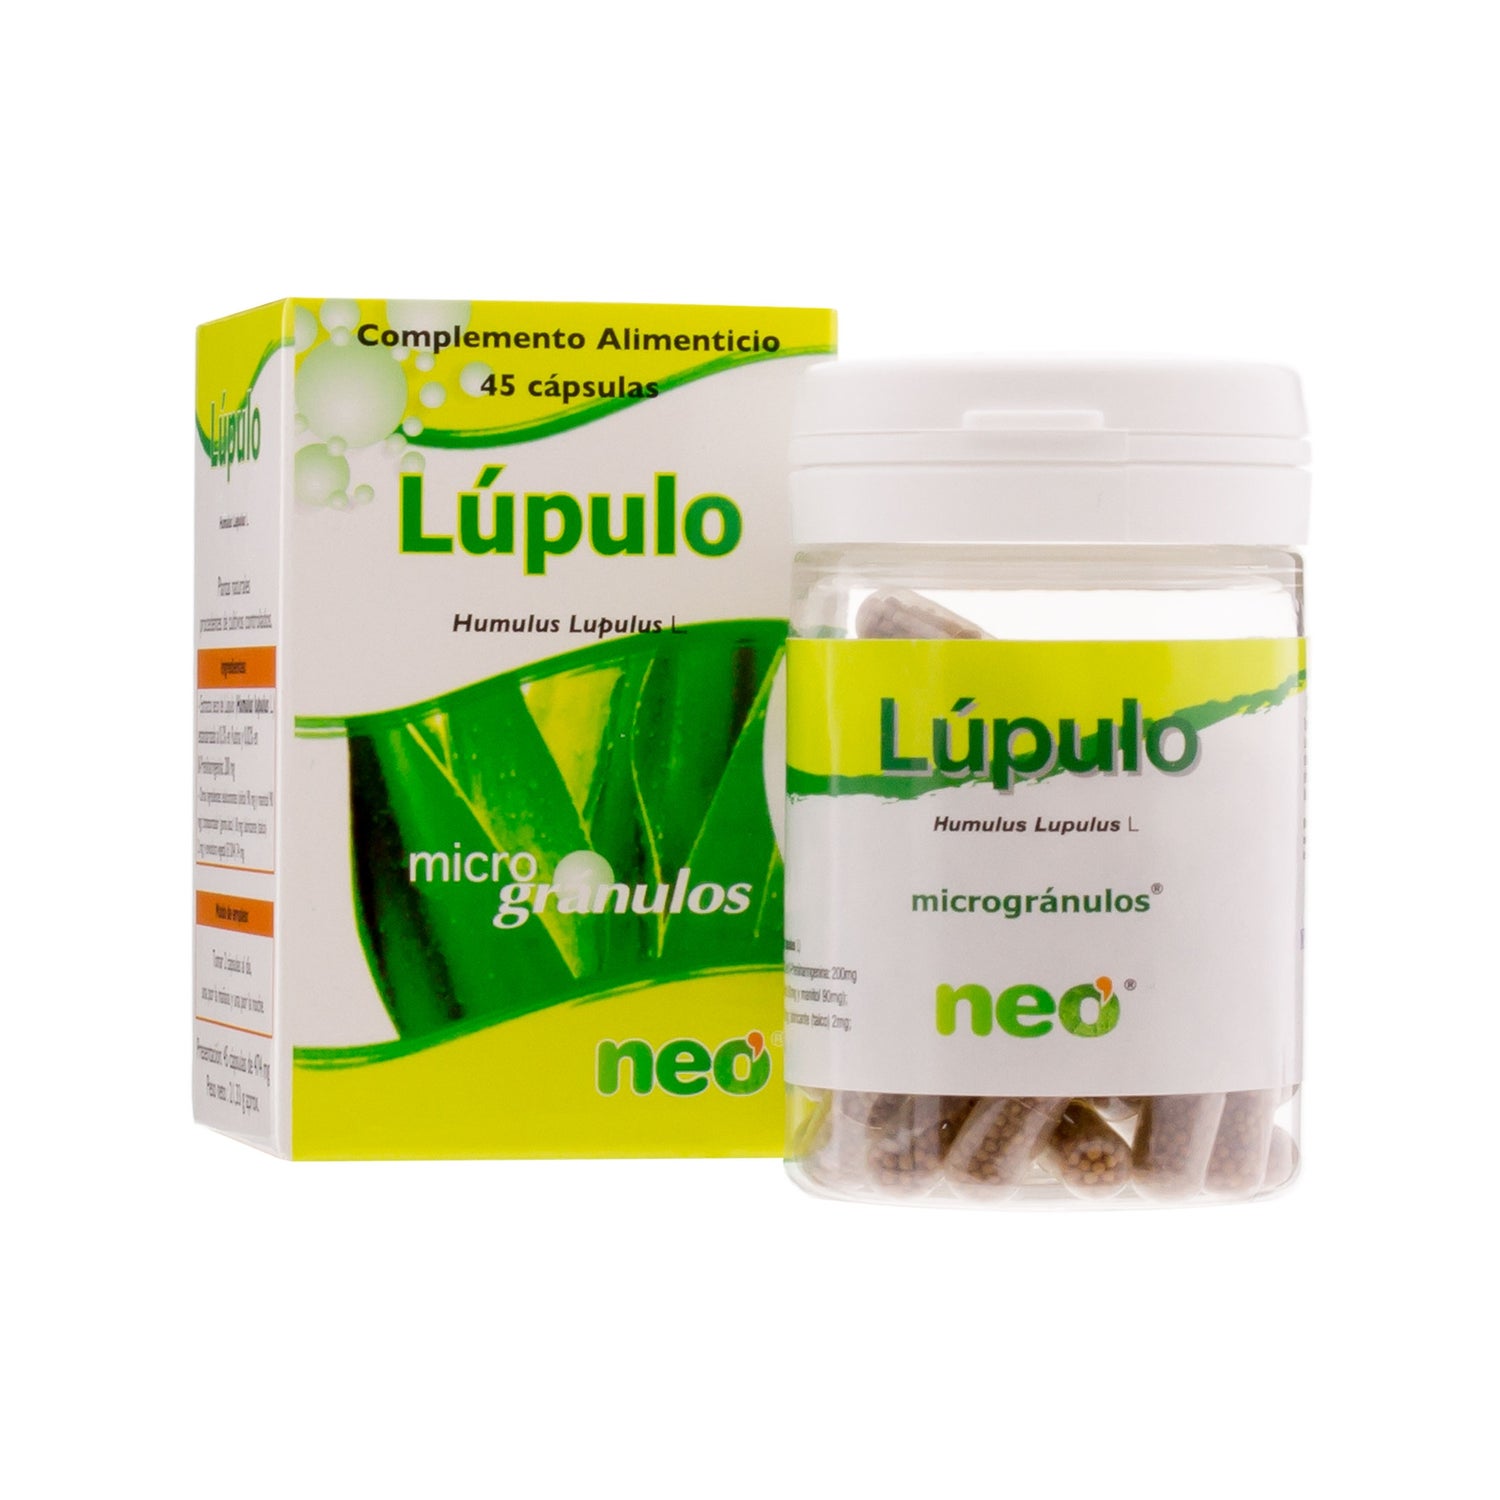 neo lupulo 45c ps